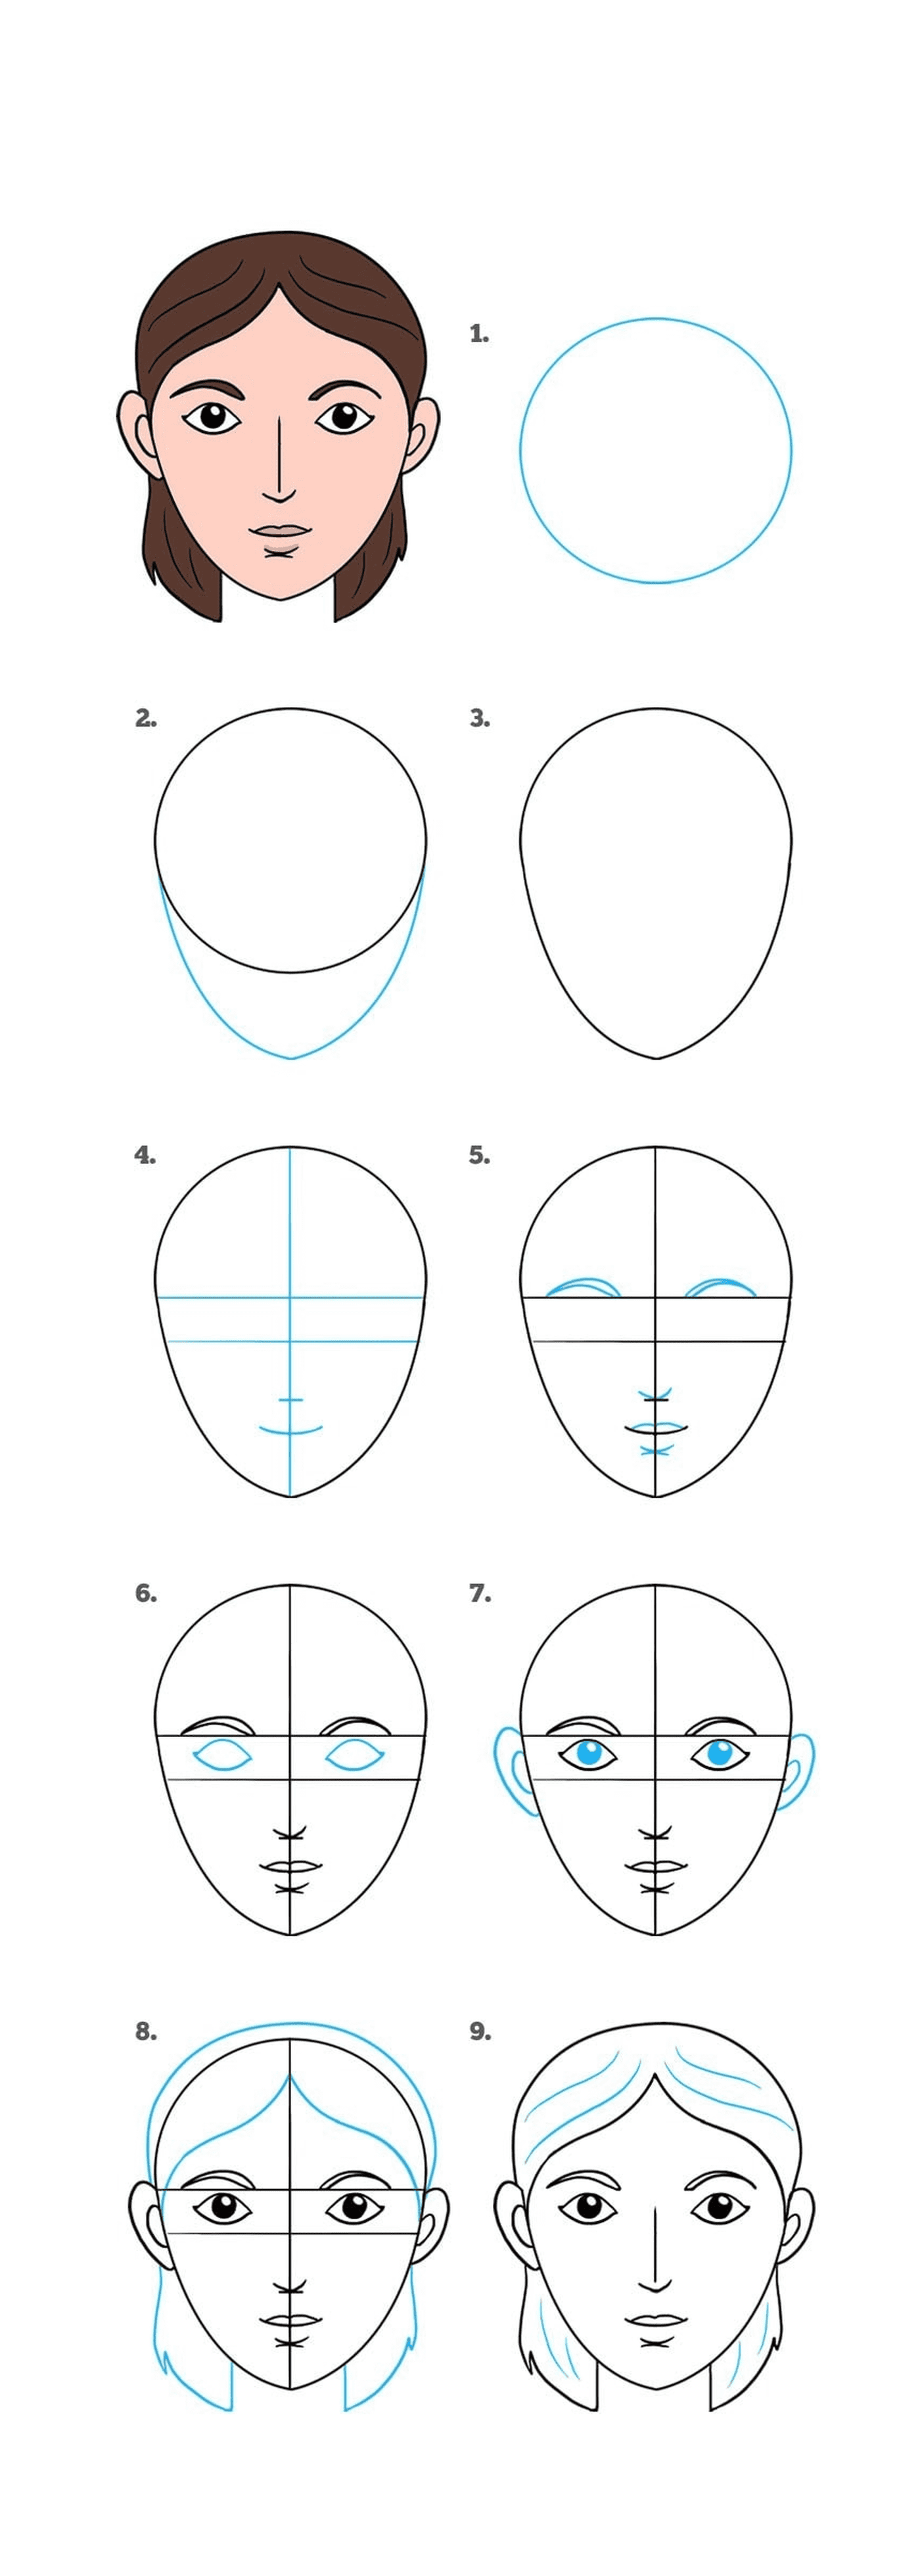  How to draw a cartoon face 